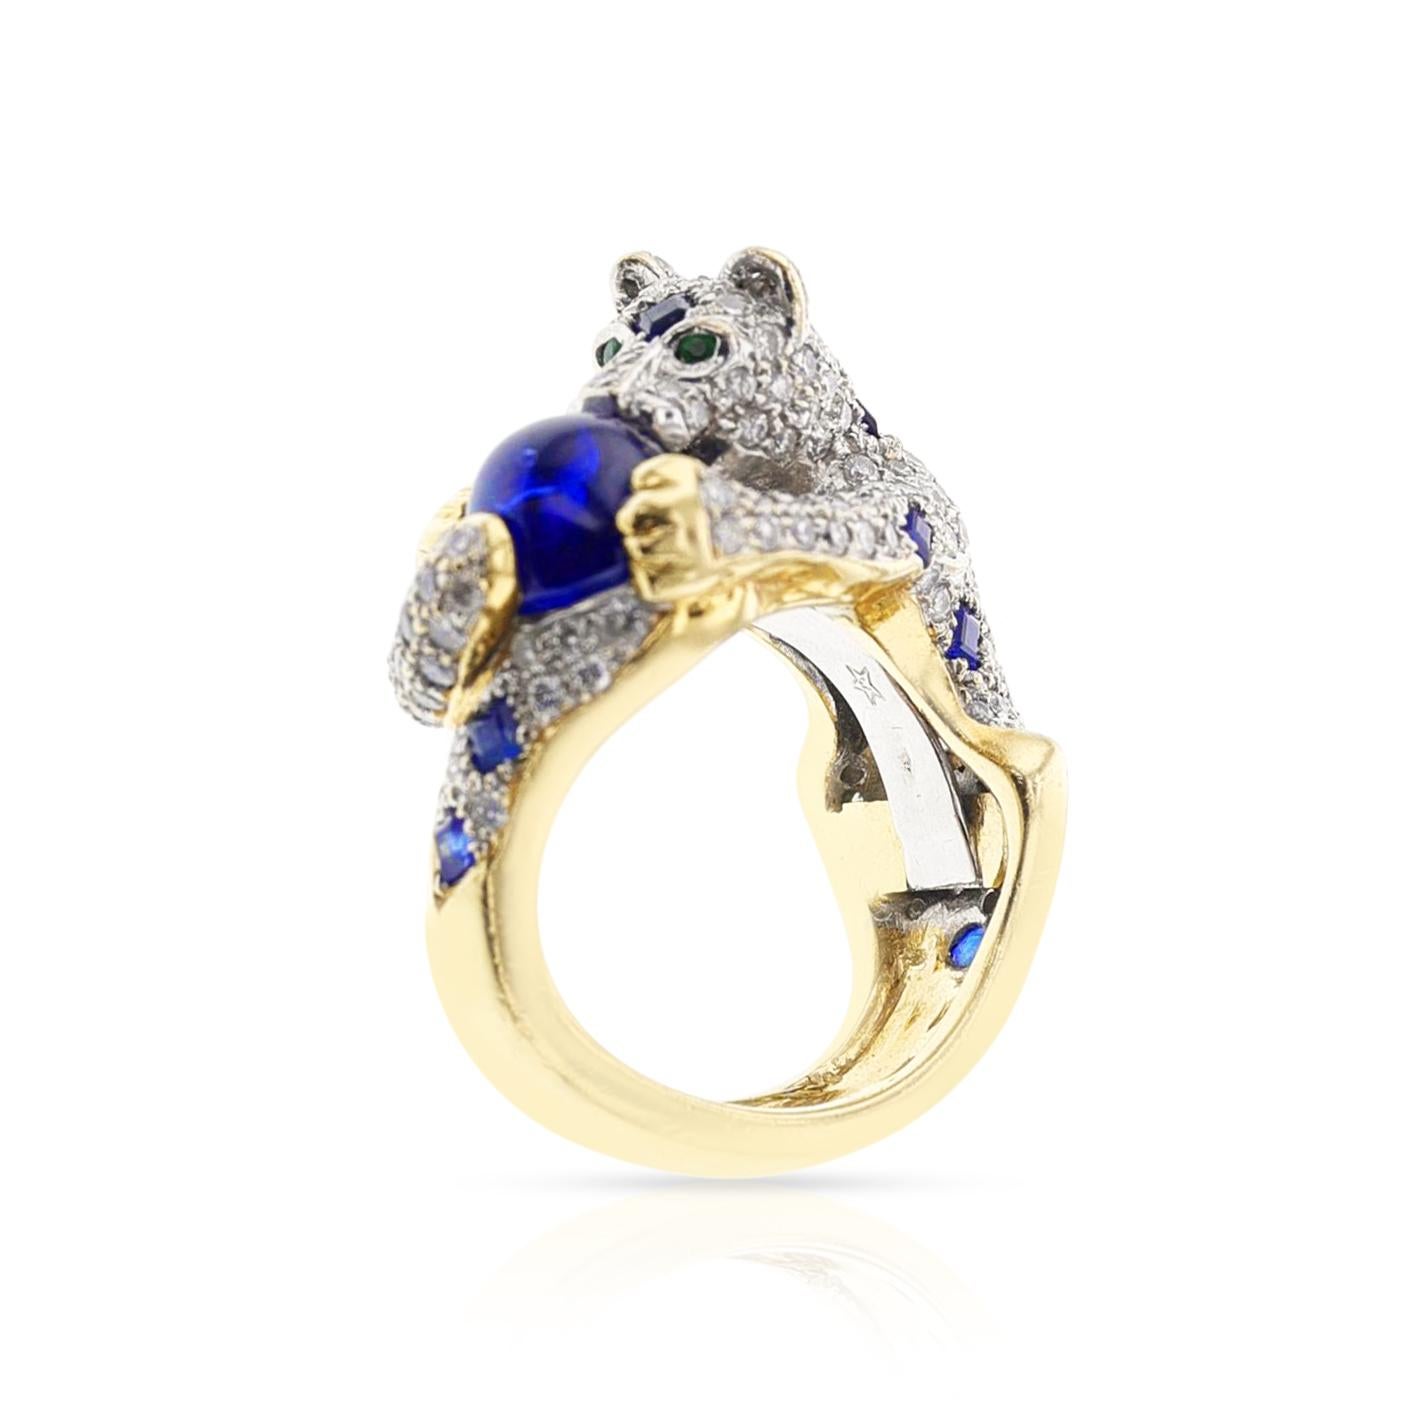 A Diamond, Sapphire, and Emerald Panther Ring in 18 Karat Gold. The Panther is holding a sapphire, and the eyes are Emerald. The sapphire weighs 6.45 carats, and the diamodns weigh 3.60 carats. The total weight is 22.09 grams. Ring Size US 6.25.